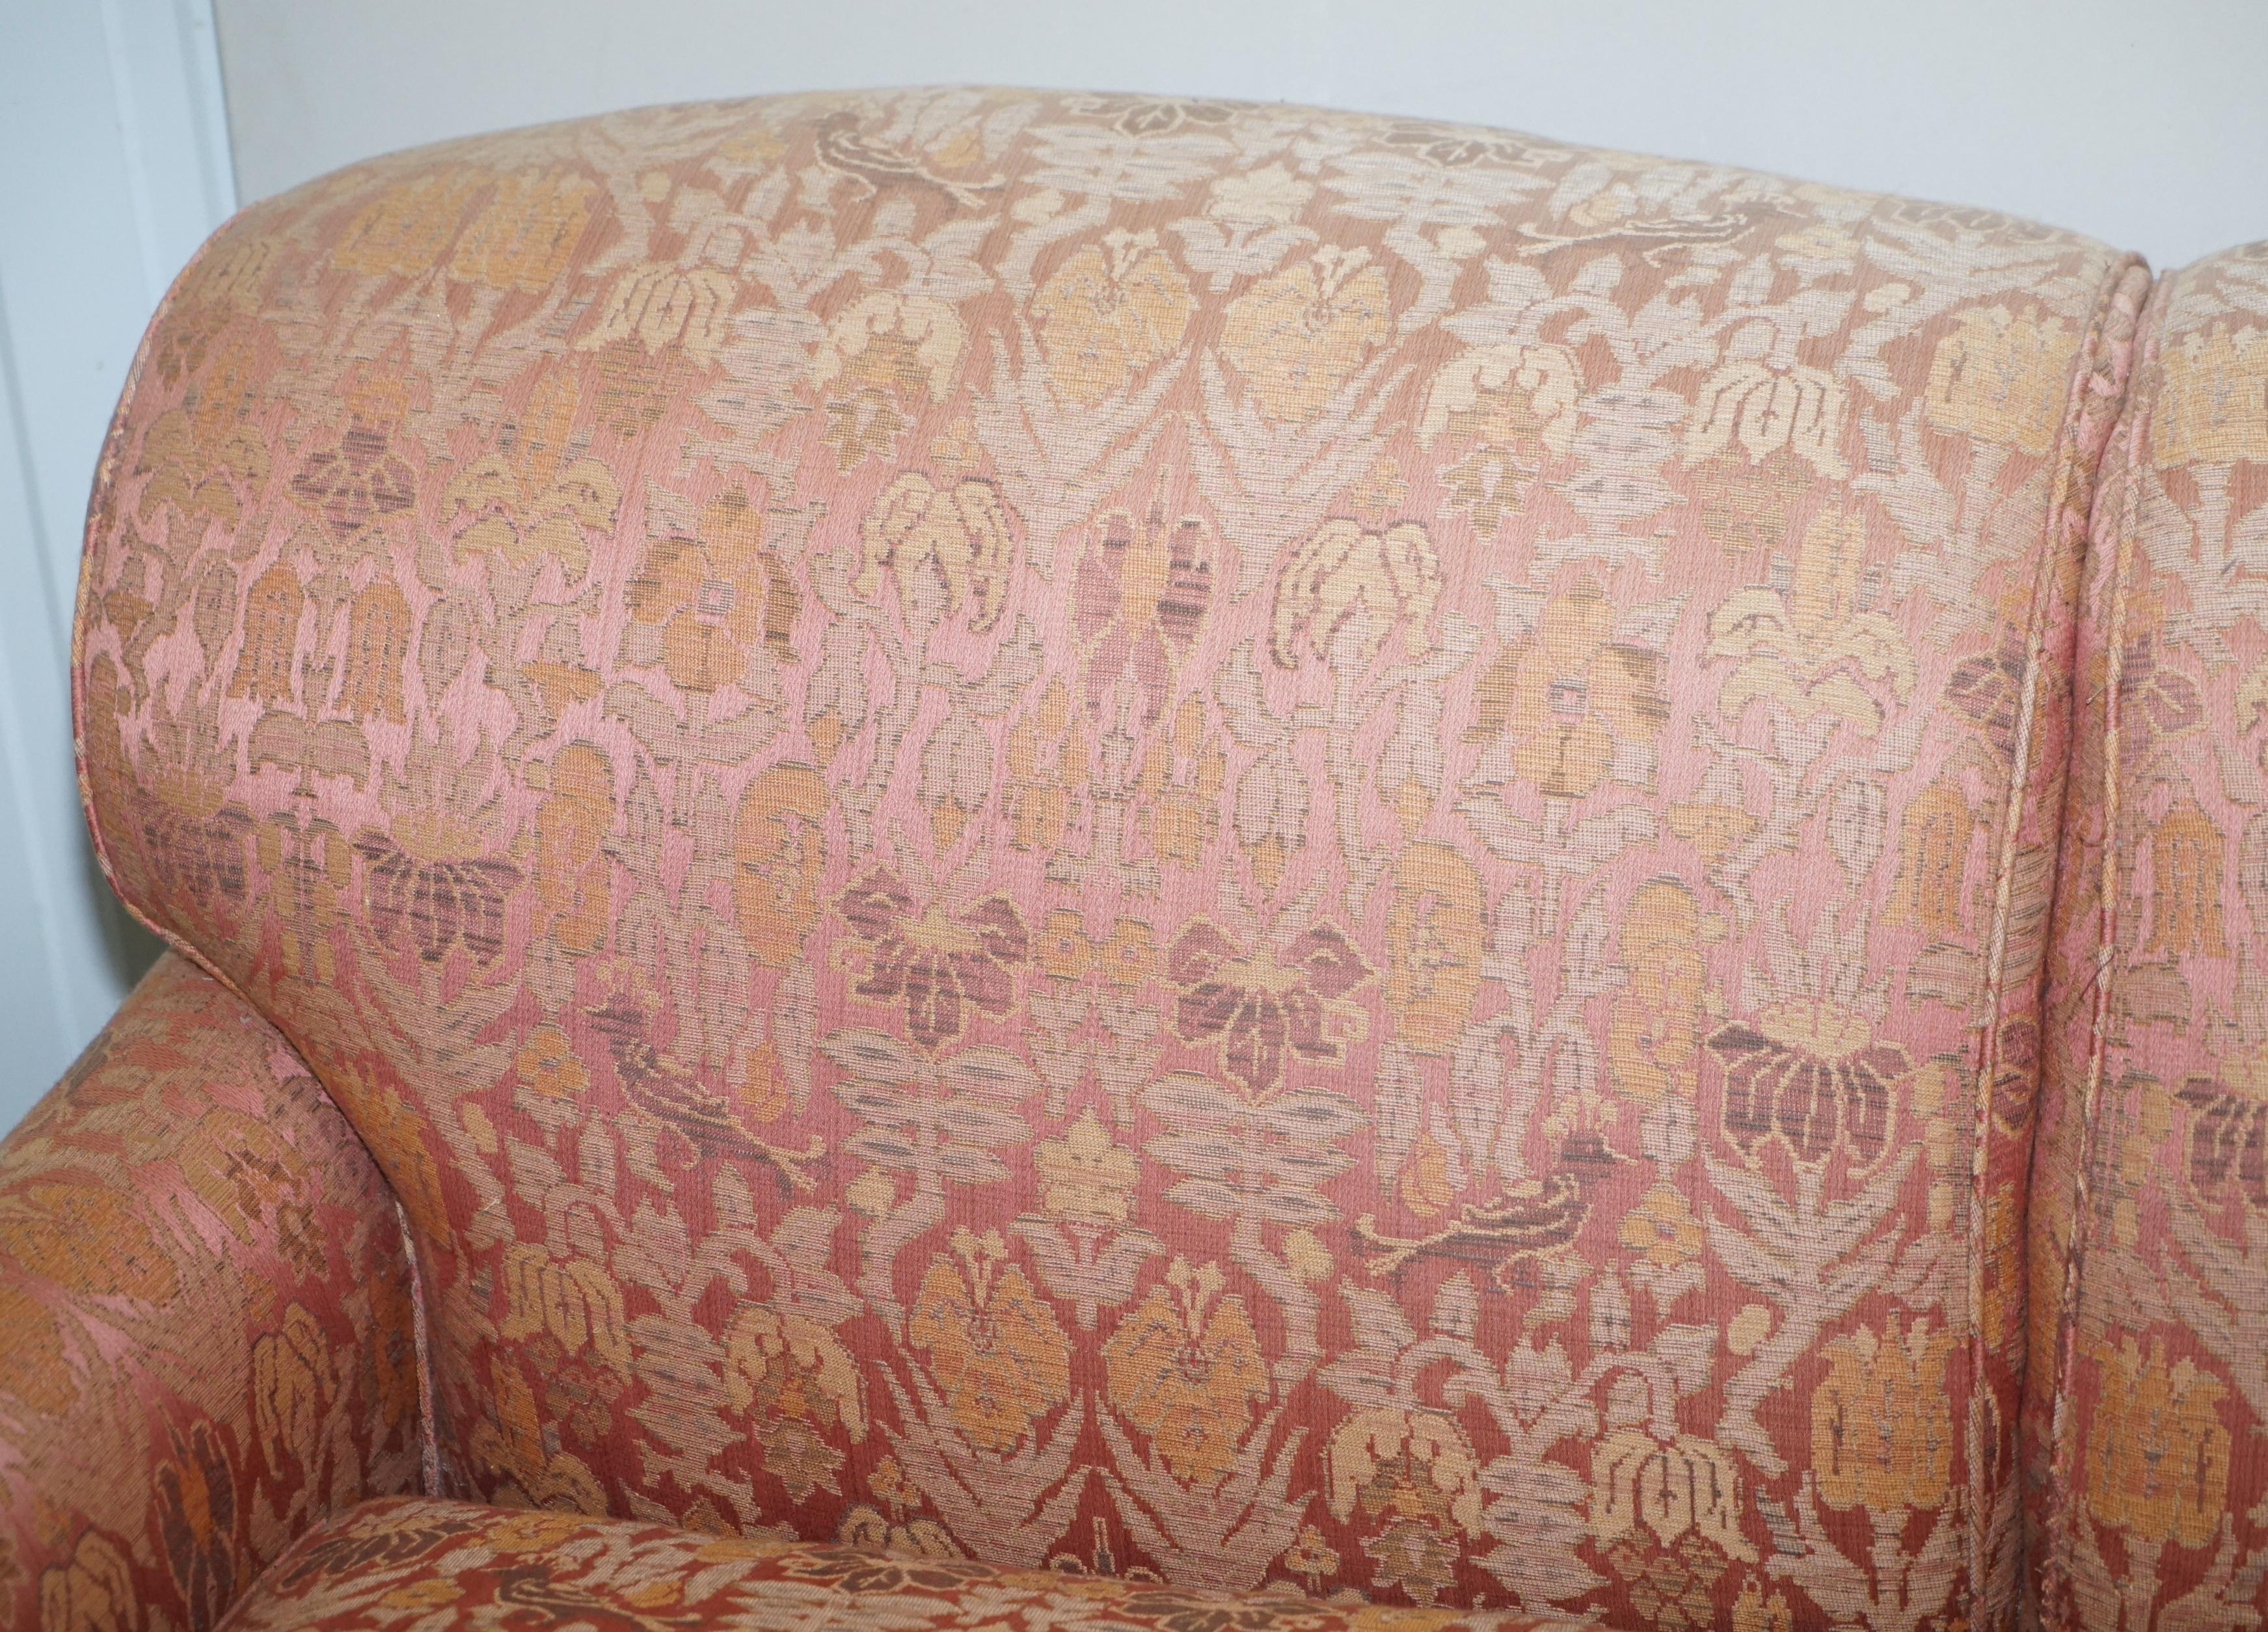 Upholstery 1 of 2 George Smith Scroll Arm Two-Seat Sofas Embroidered Fabric